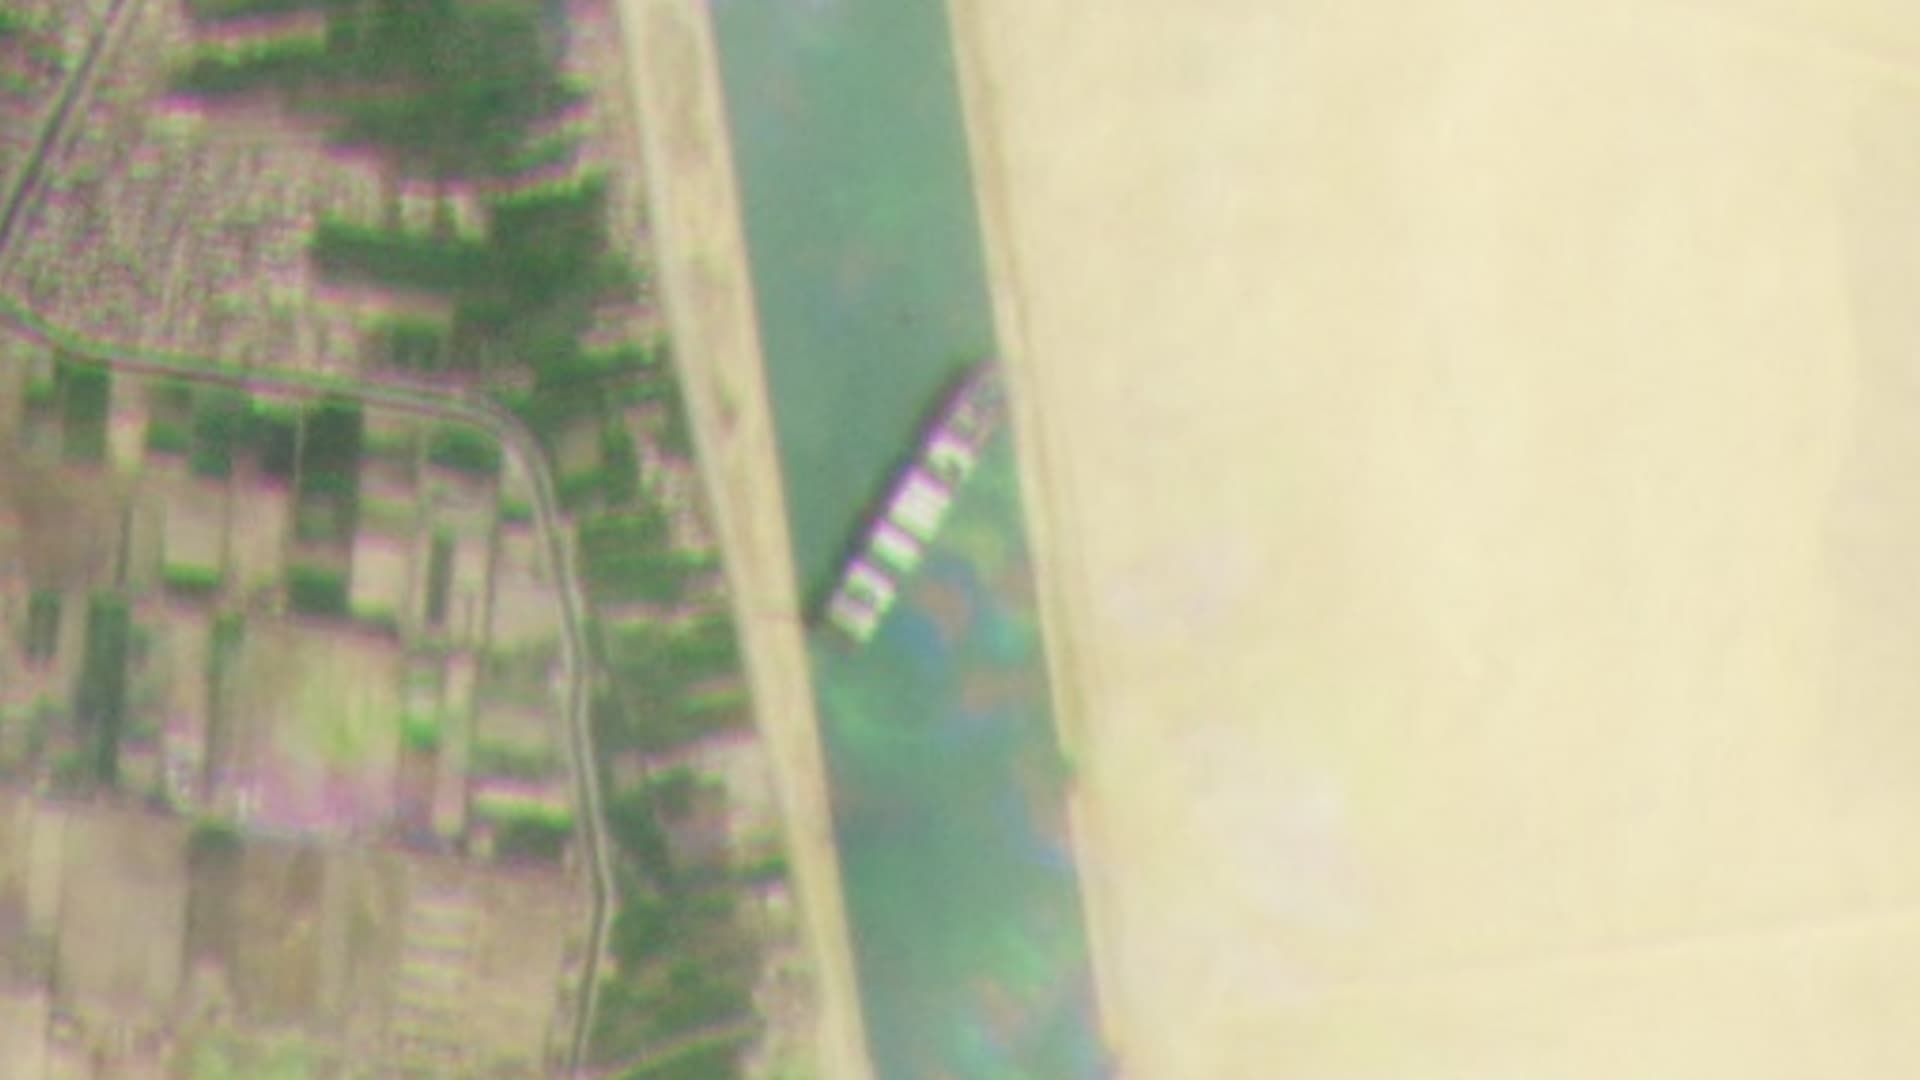 Cropped satellite imagery captured on March 23, 2021 shows the cargo container ship Ever Given blocking the Suez Canal in Egypt.